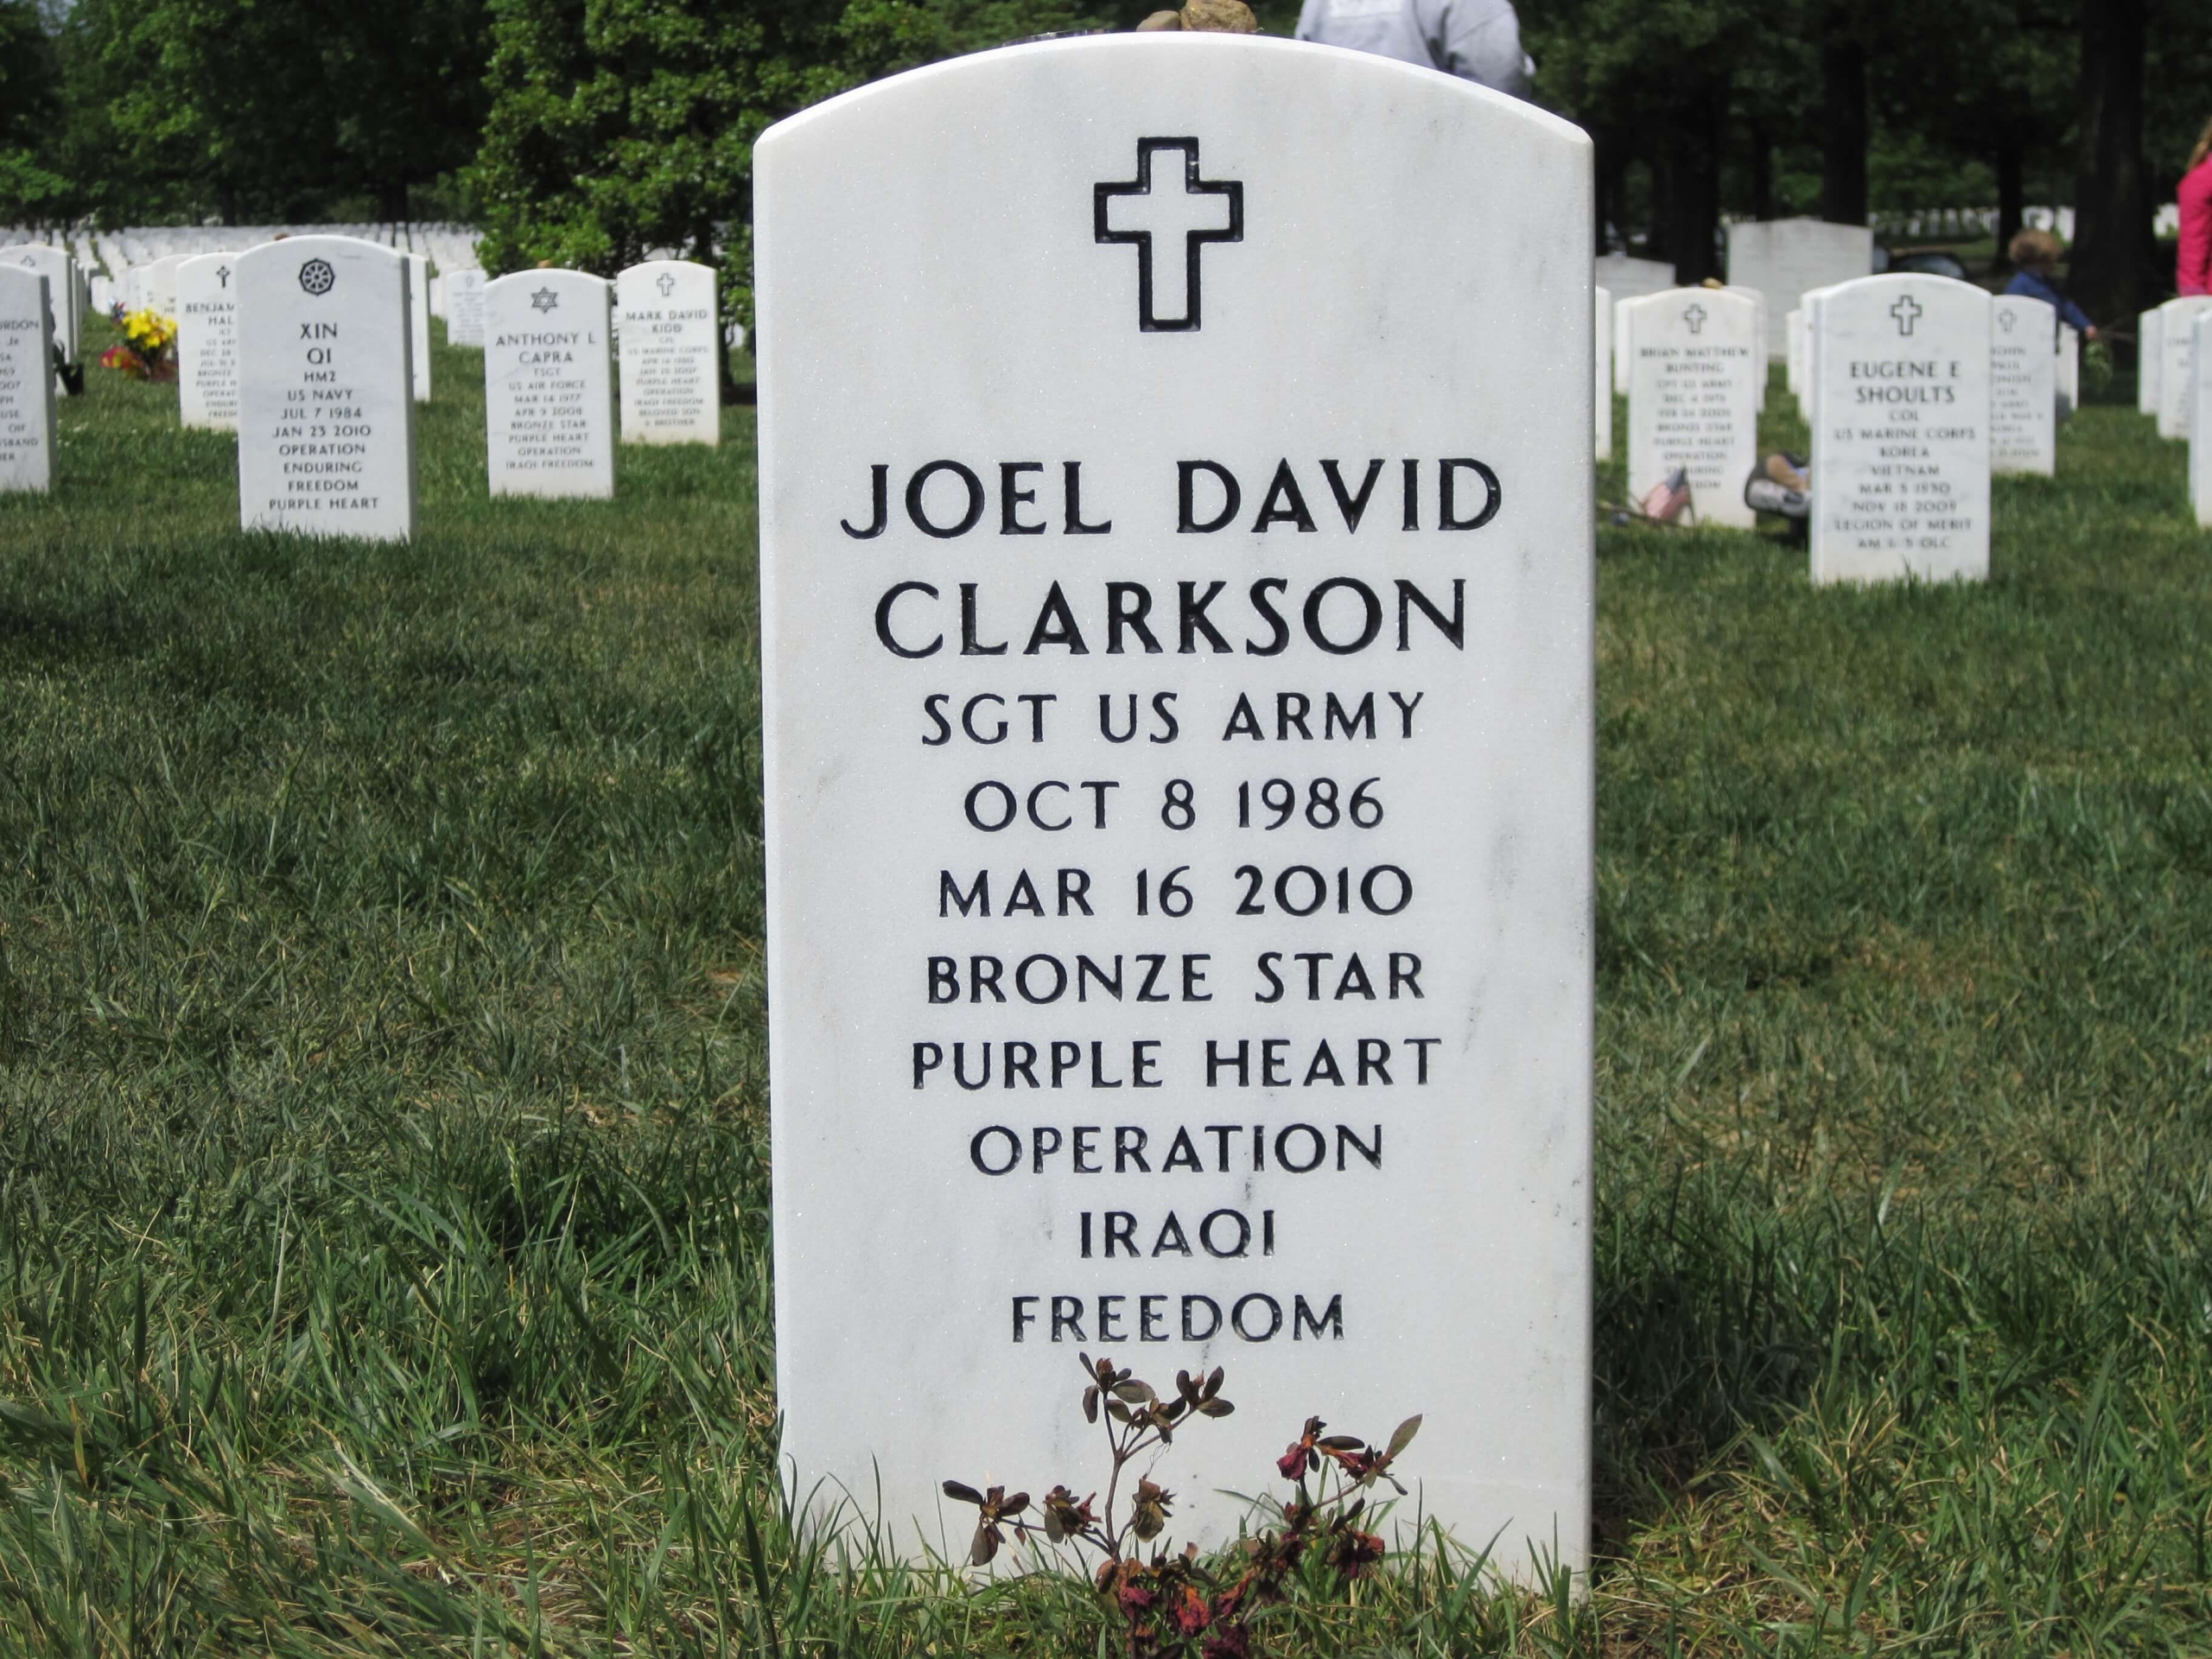 jdclarkson-gravesite-photo-by-eileen-horan-may-2010-001